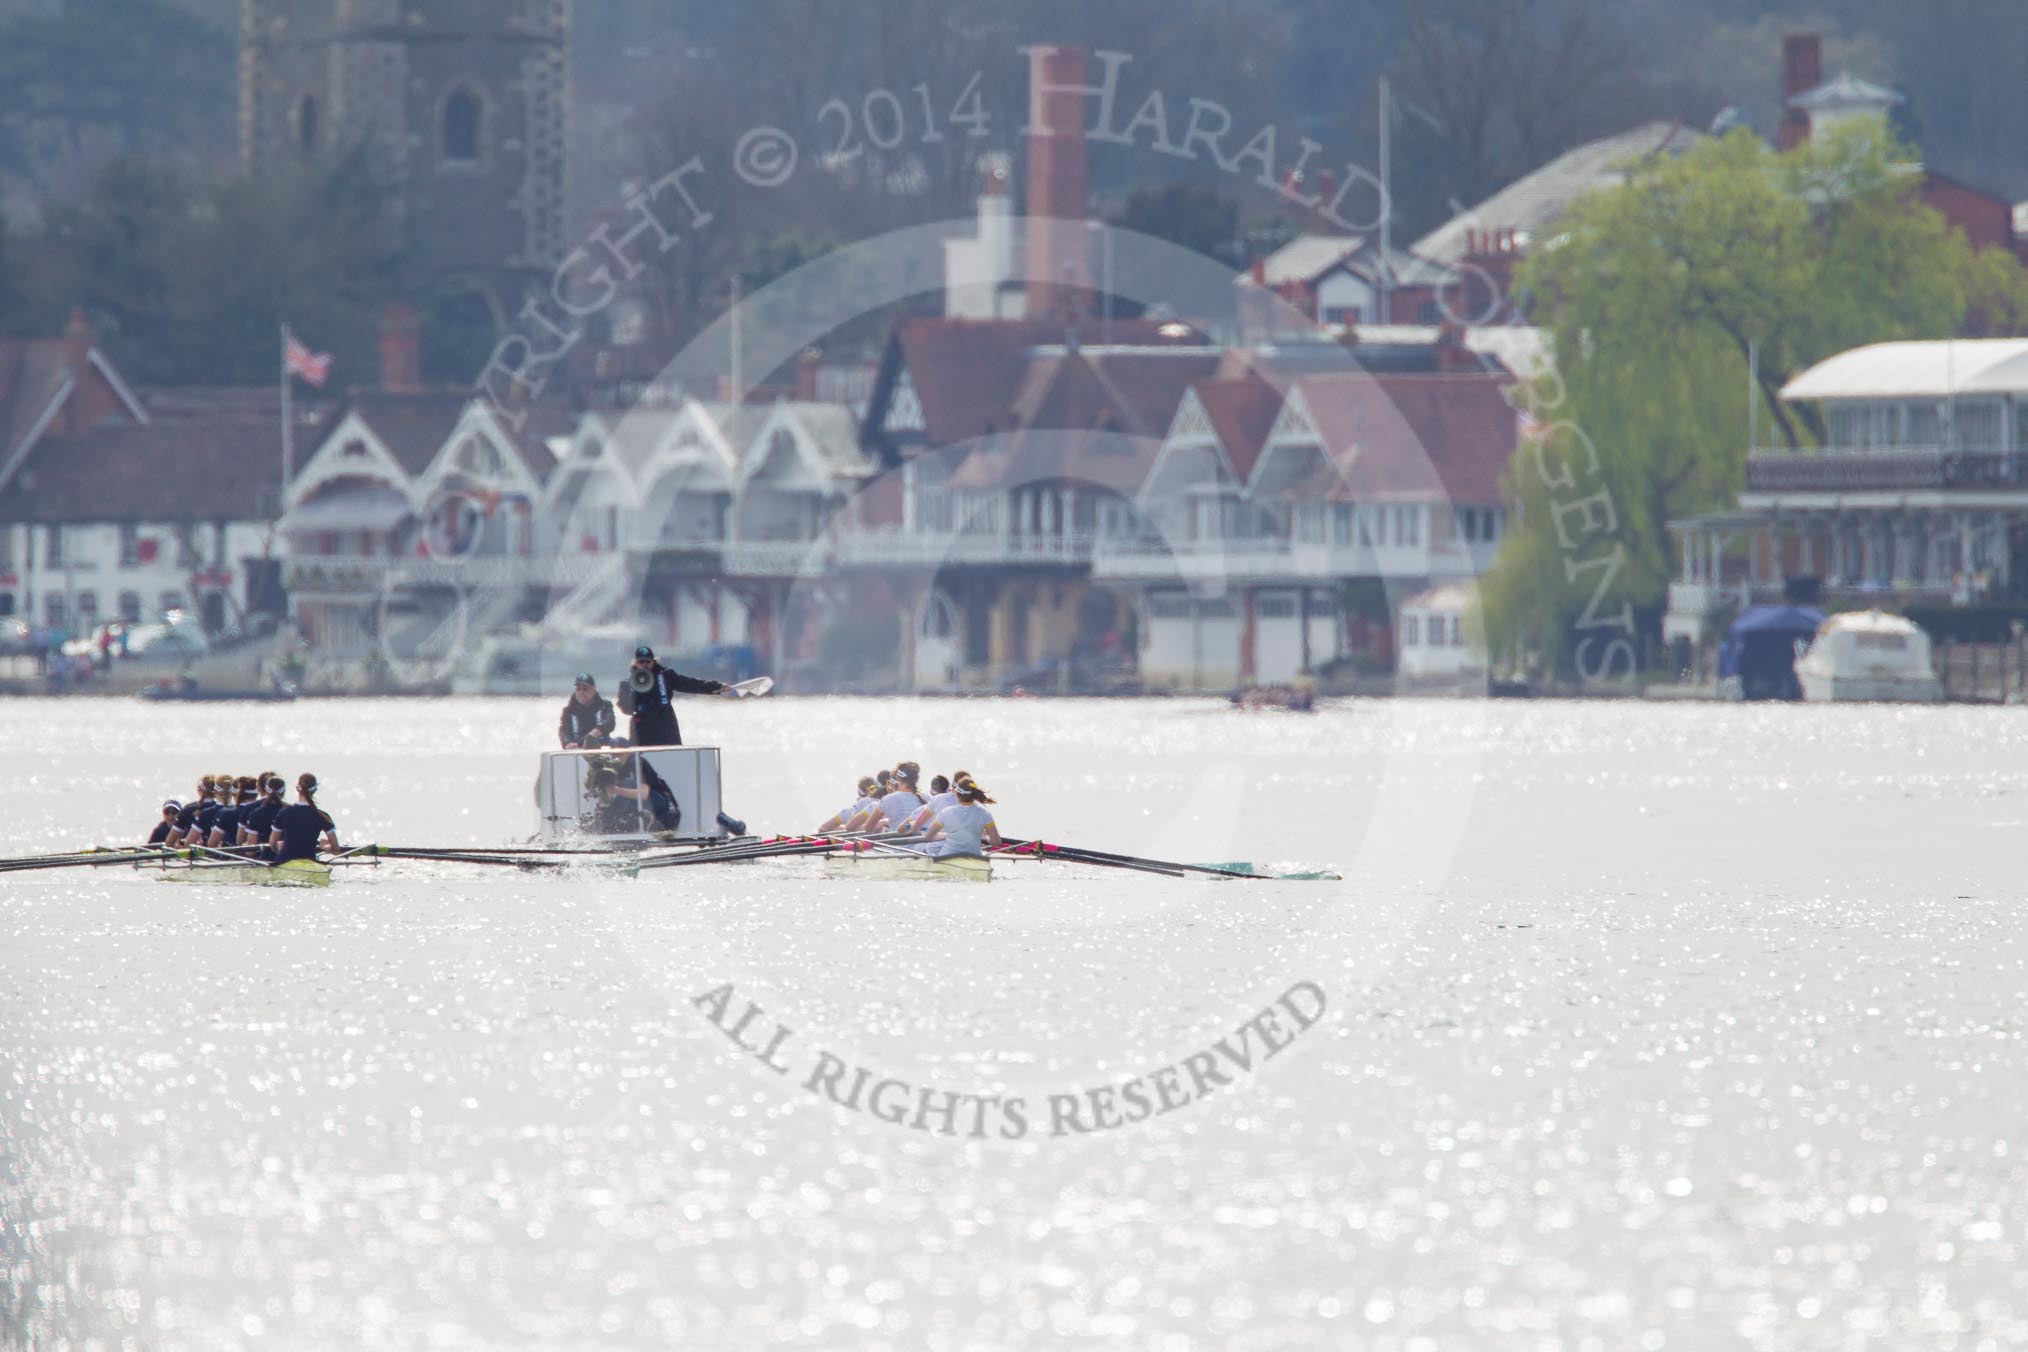 The Women's Boat Race and Henley Boat Races 2014: The Women's Reserves - Osiris v. Blondie race. Osiris (Oxford) on the left,  and Blondie (Cambridge) are getting close enough to be warned by the race umpire..
River Thames,
Henley-on-Thames,
Buckinghamshire,
United Kingdom,
on 30 March 2014 at 14:15, image #137